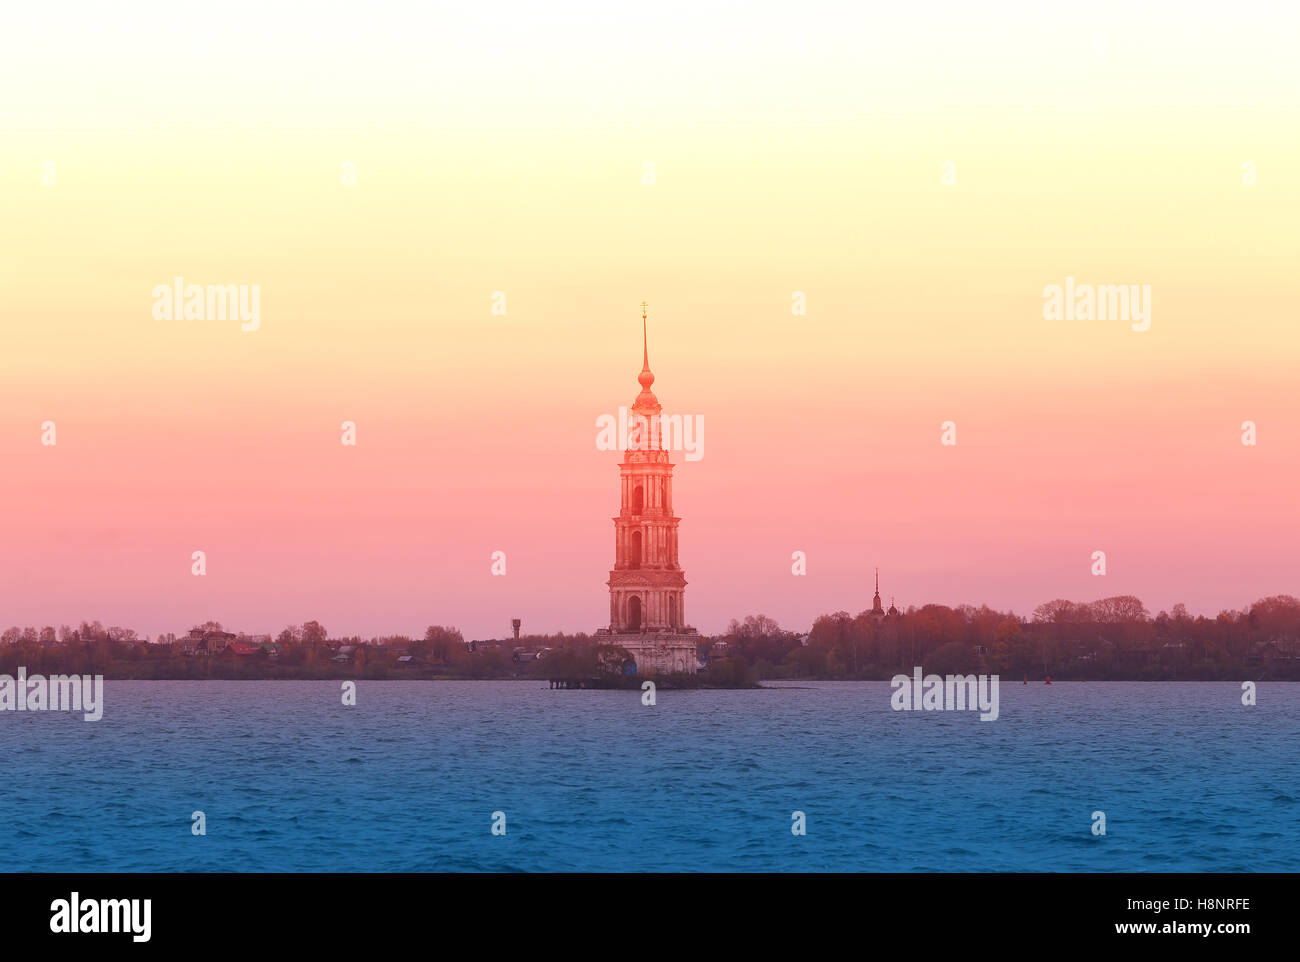 The beautiful scenery of the bell tower on the river Volga in the town of Kalyazin in Russia Stock Photo